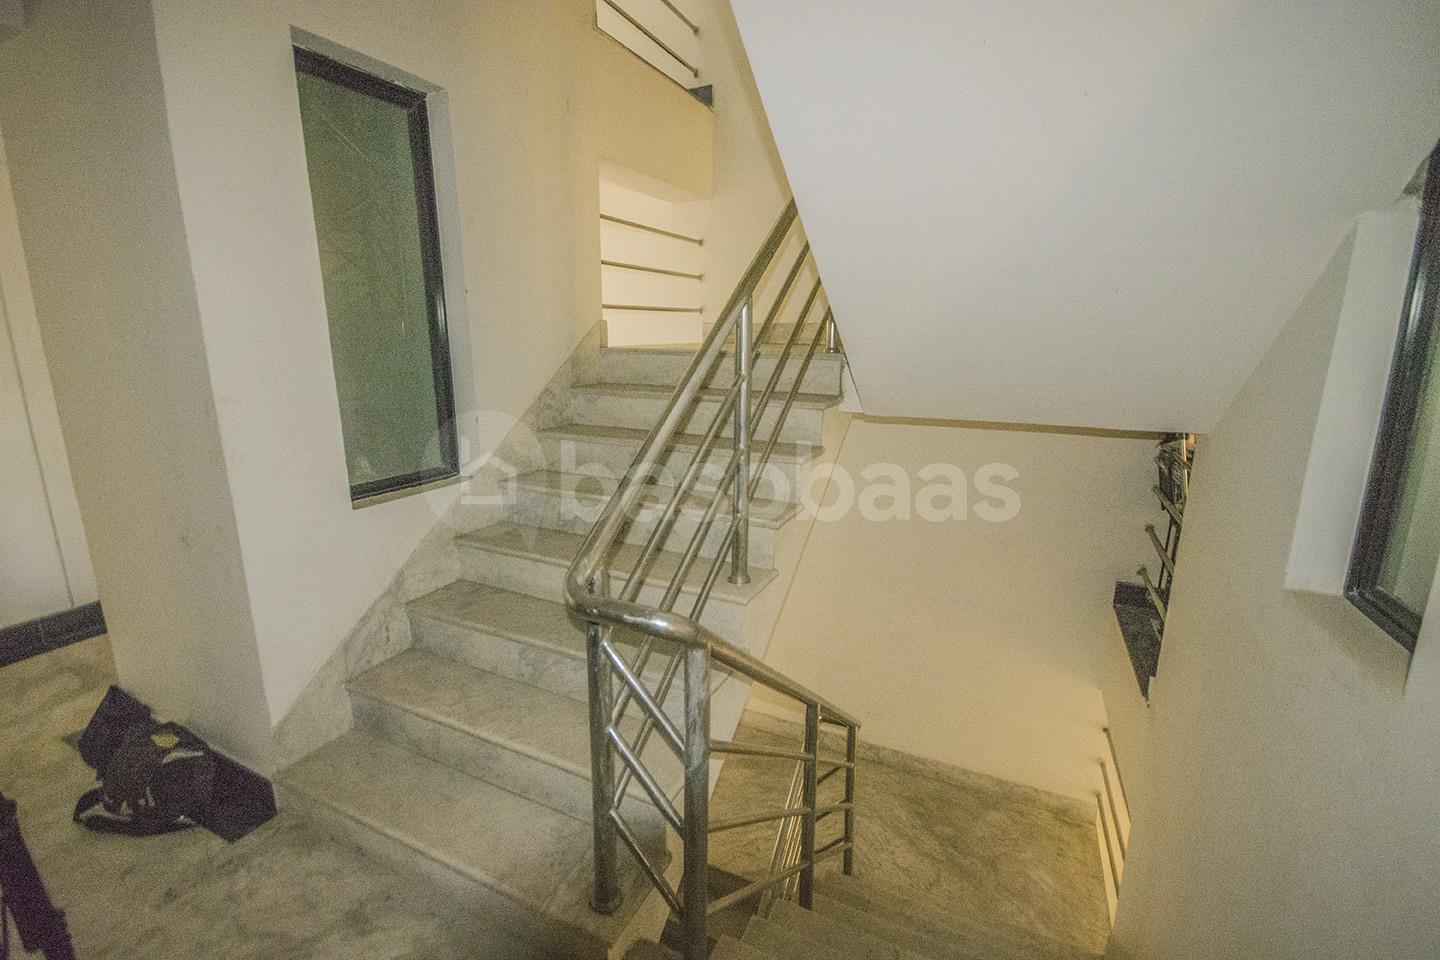 SOLD OUT: Apartment : Apartment for Sale in Jhamsikhel, Lalitpur Image 17